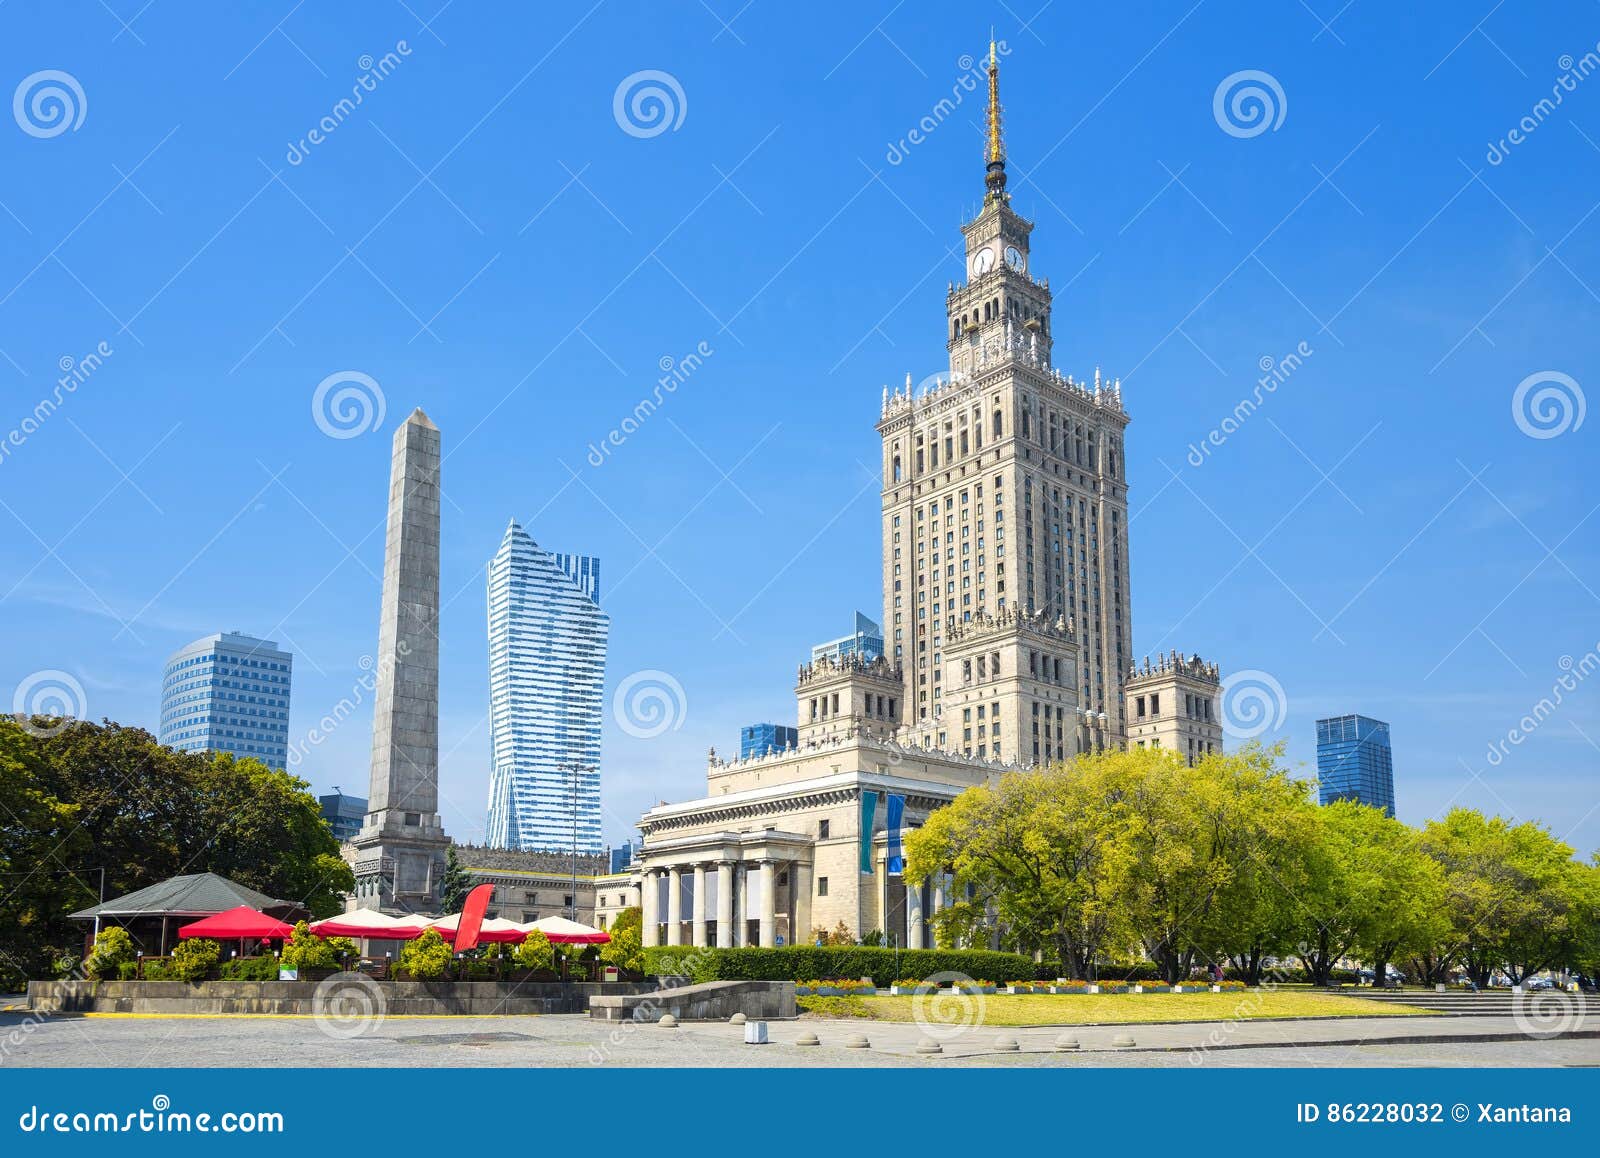 palace of culture and science, warsaw, poland